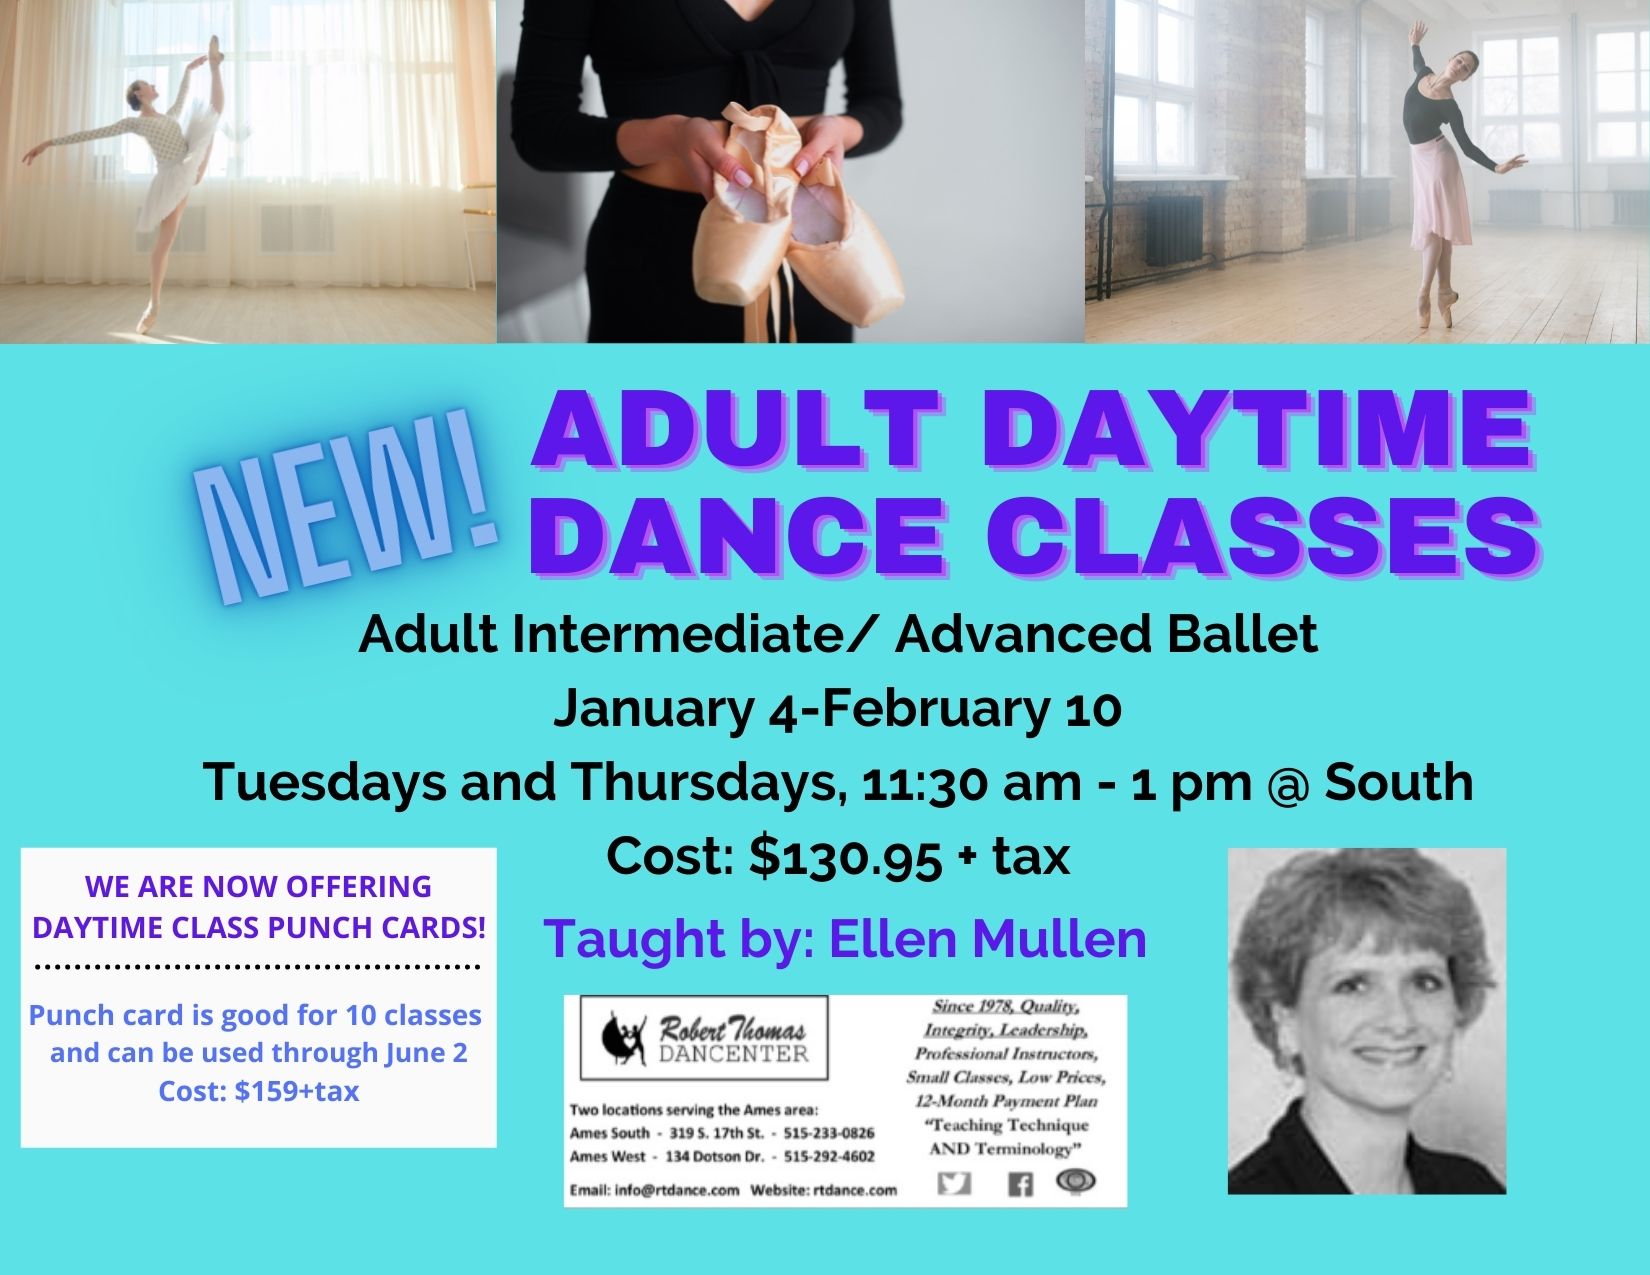 Adult daytime classes!